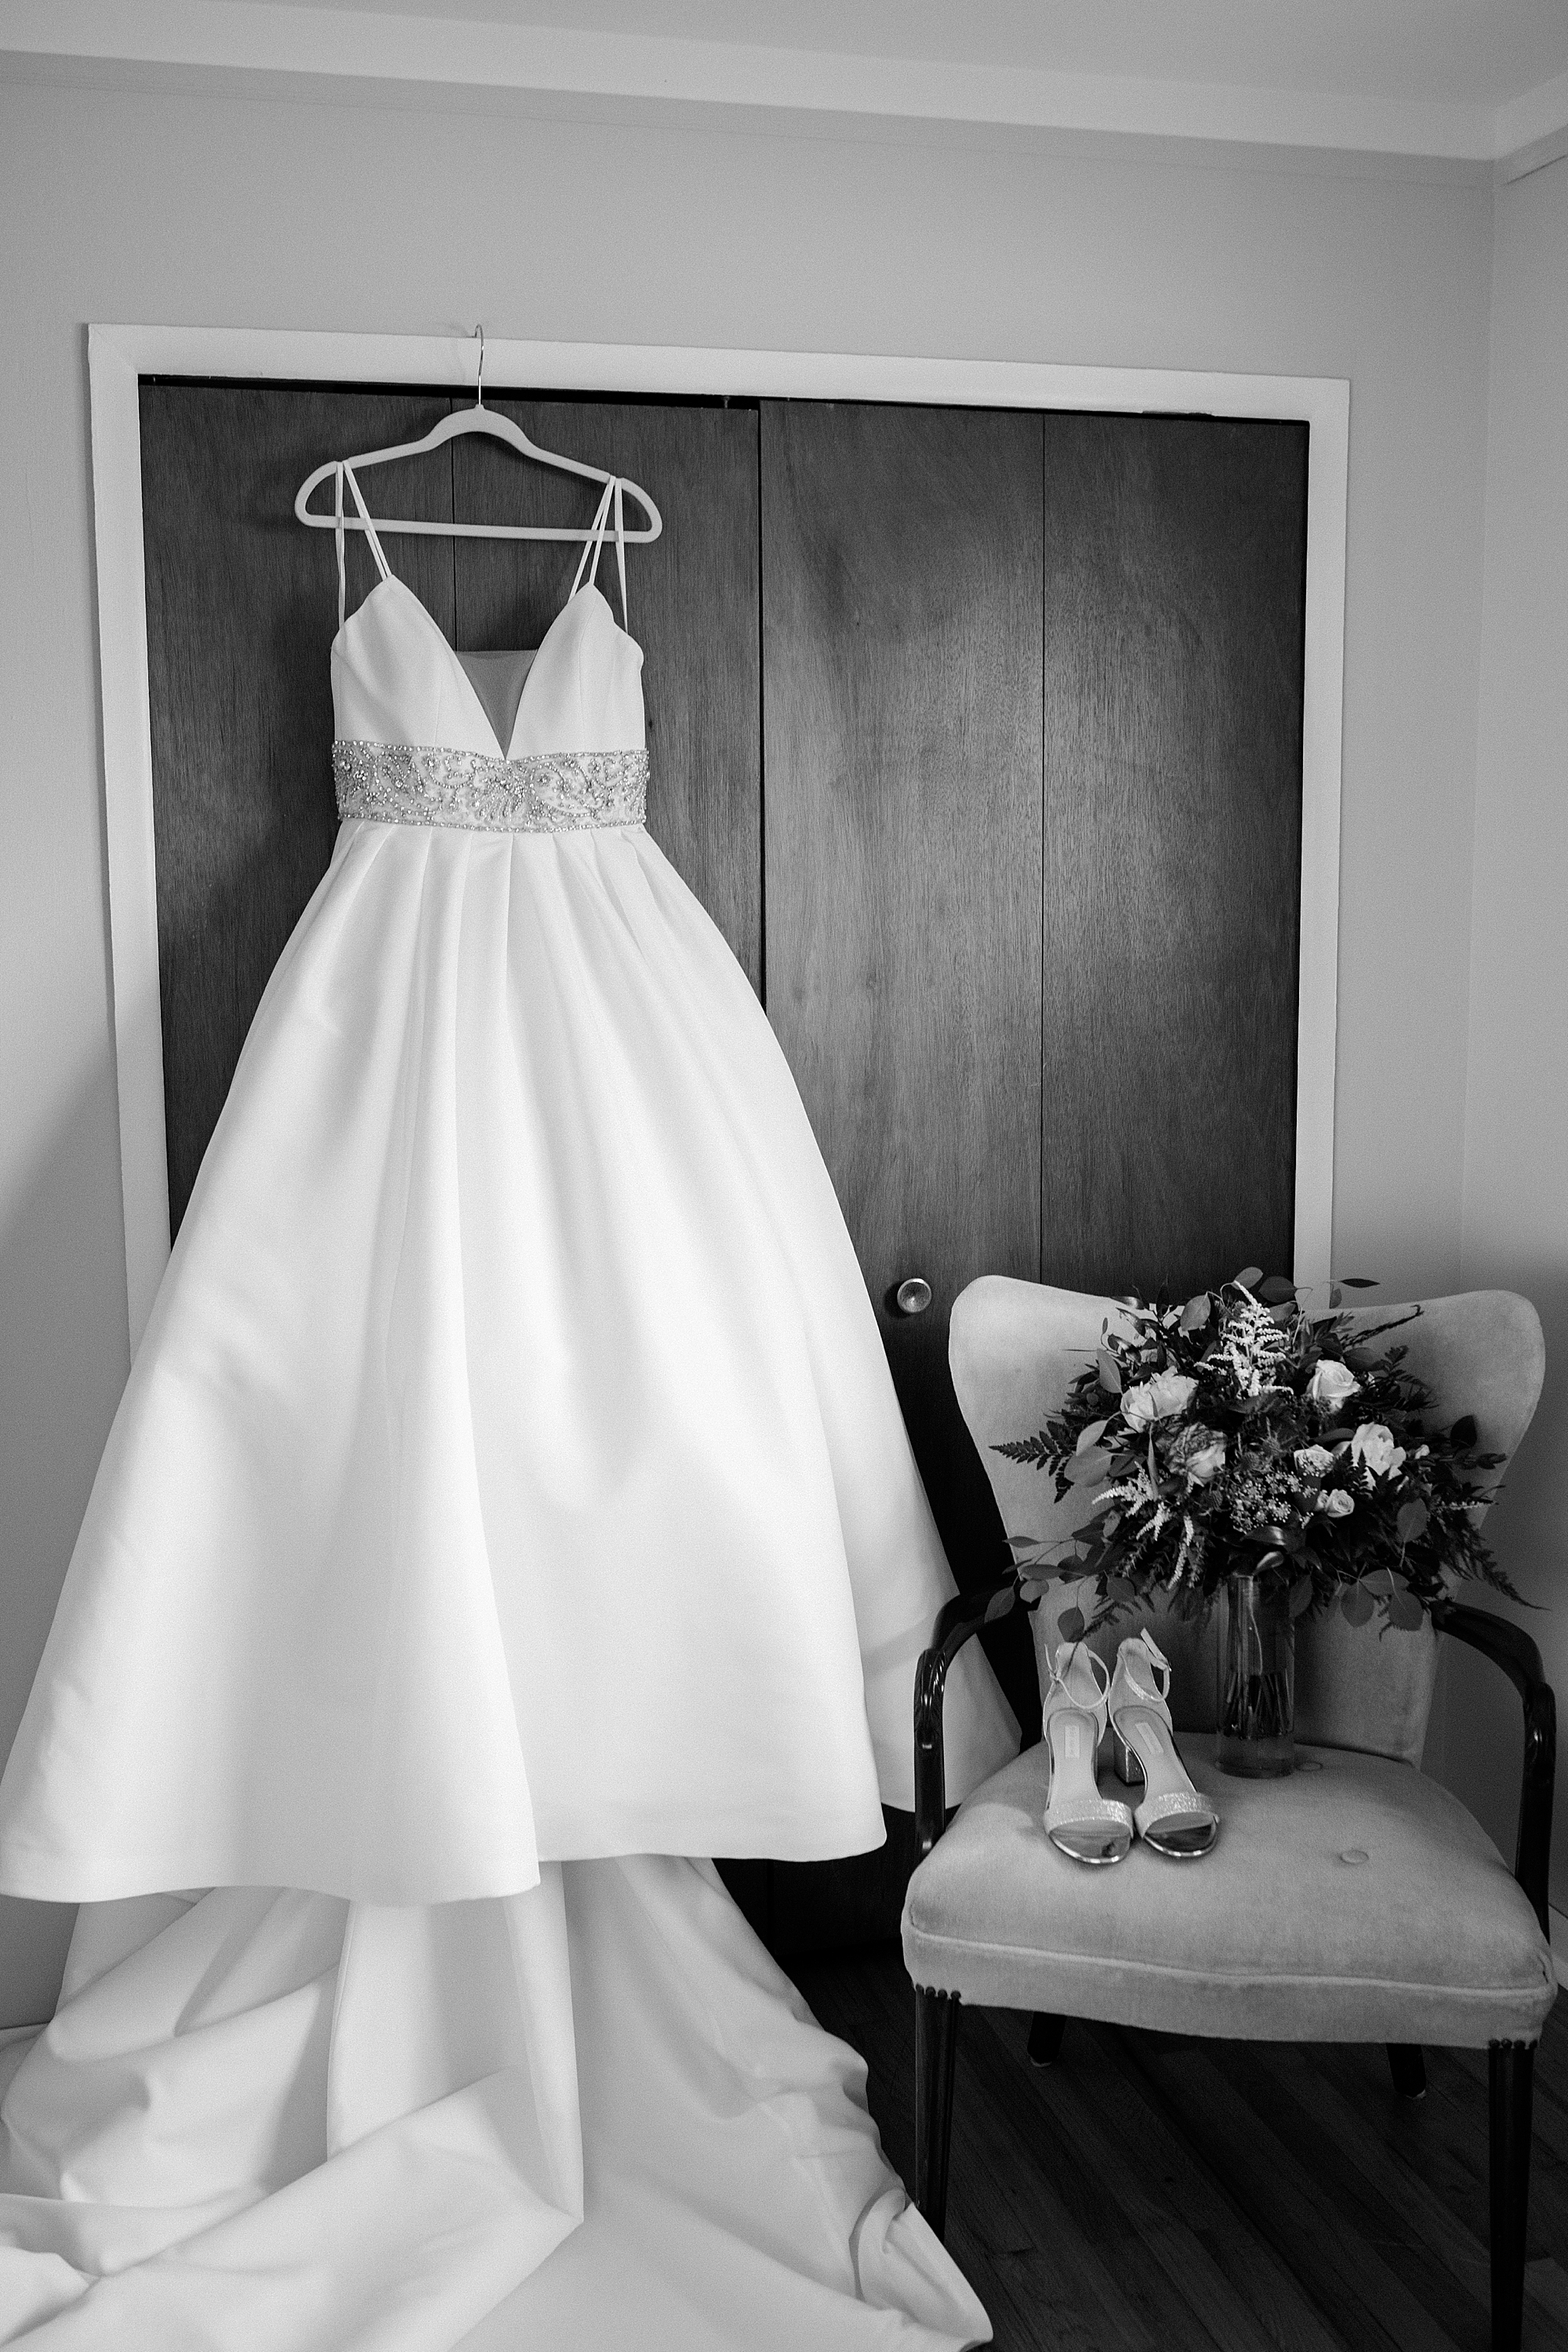 Classic Sprint Metro Detroit wedding by Breanne Rochelle Photography.